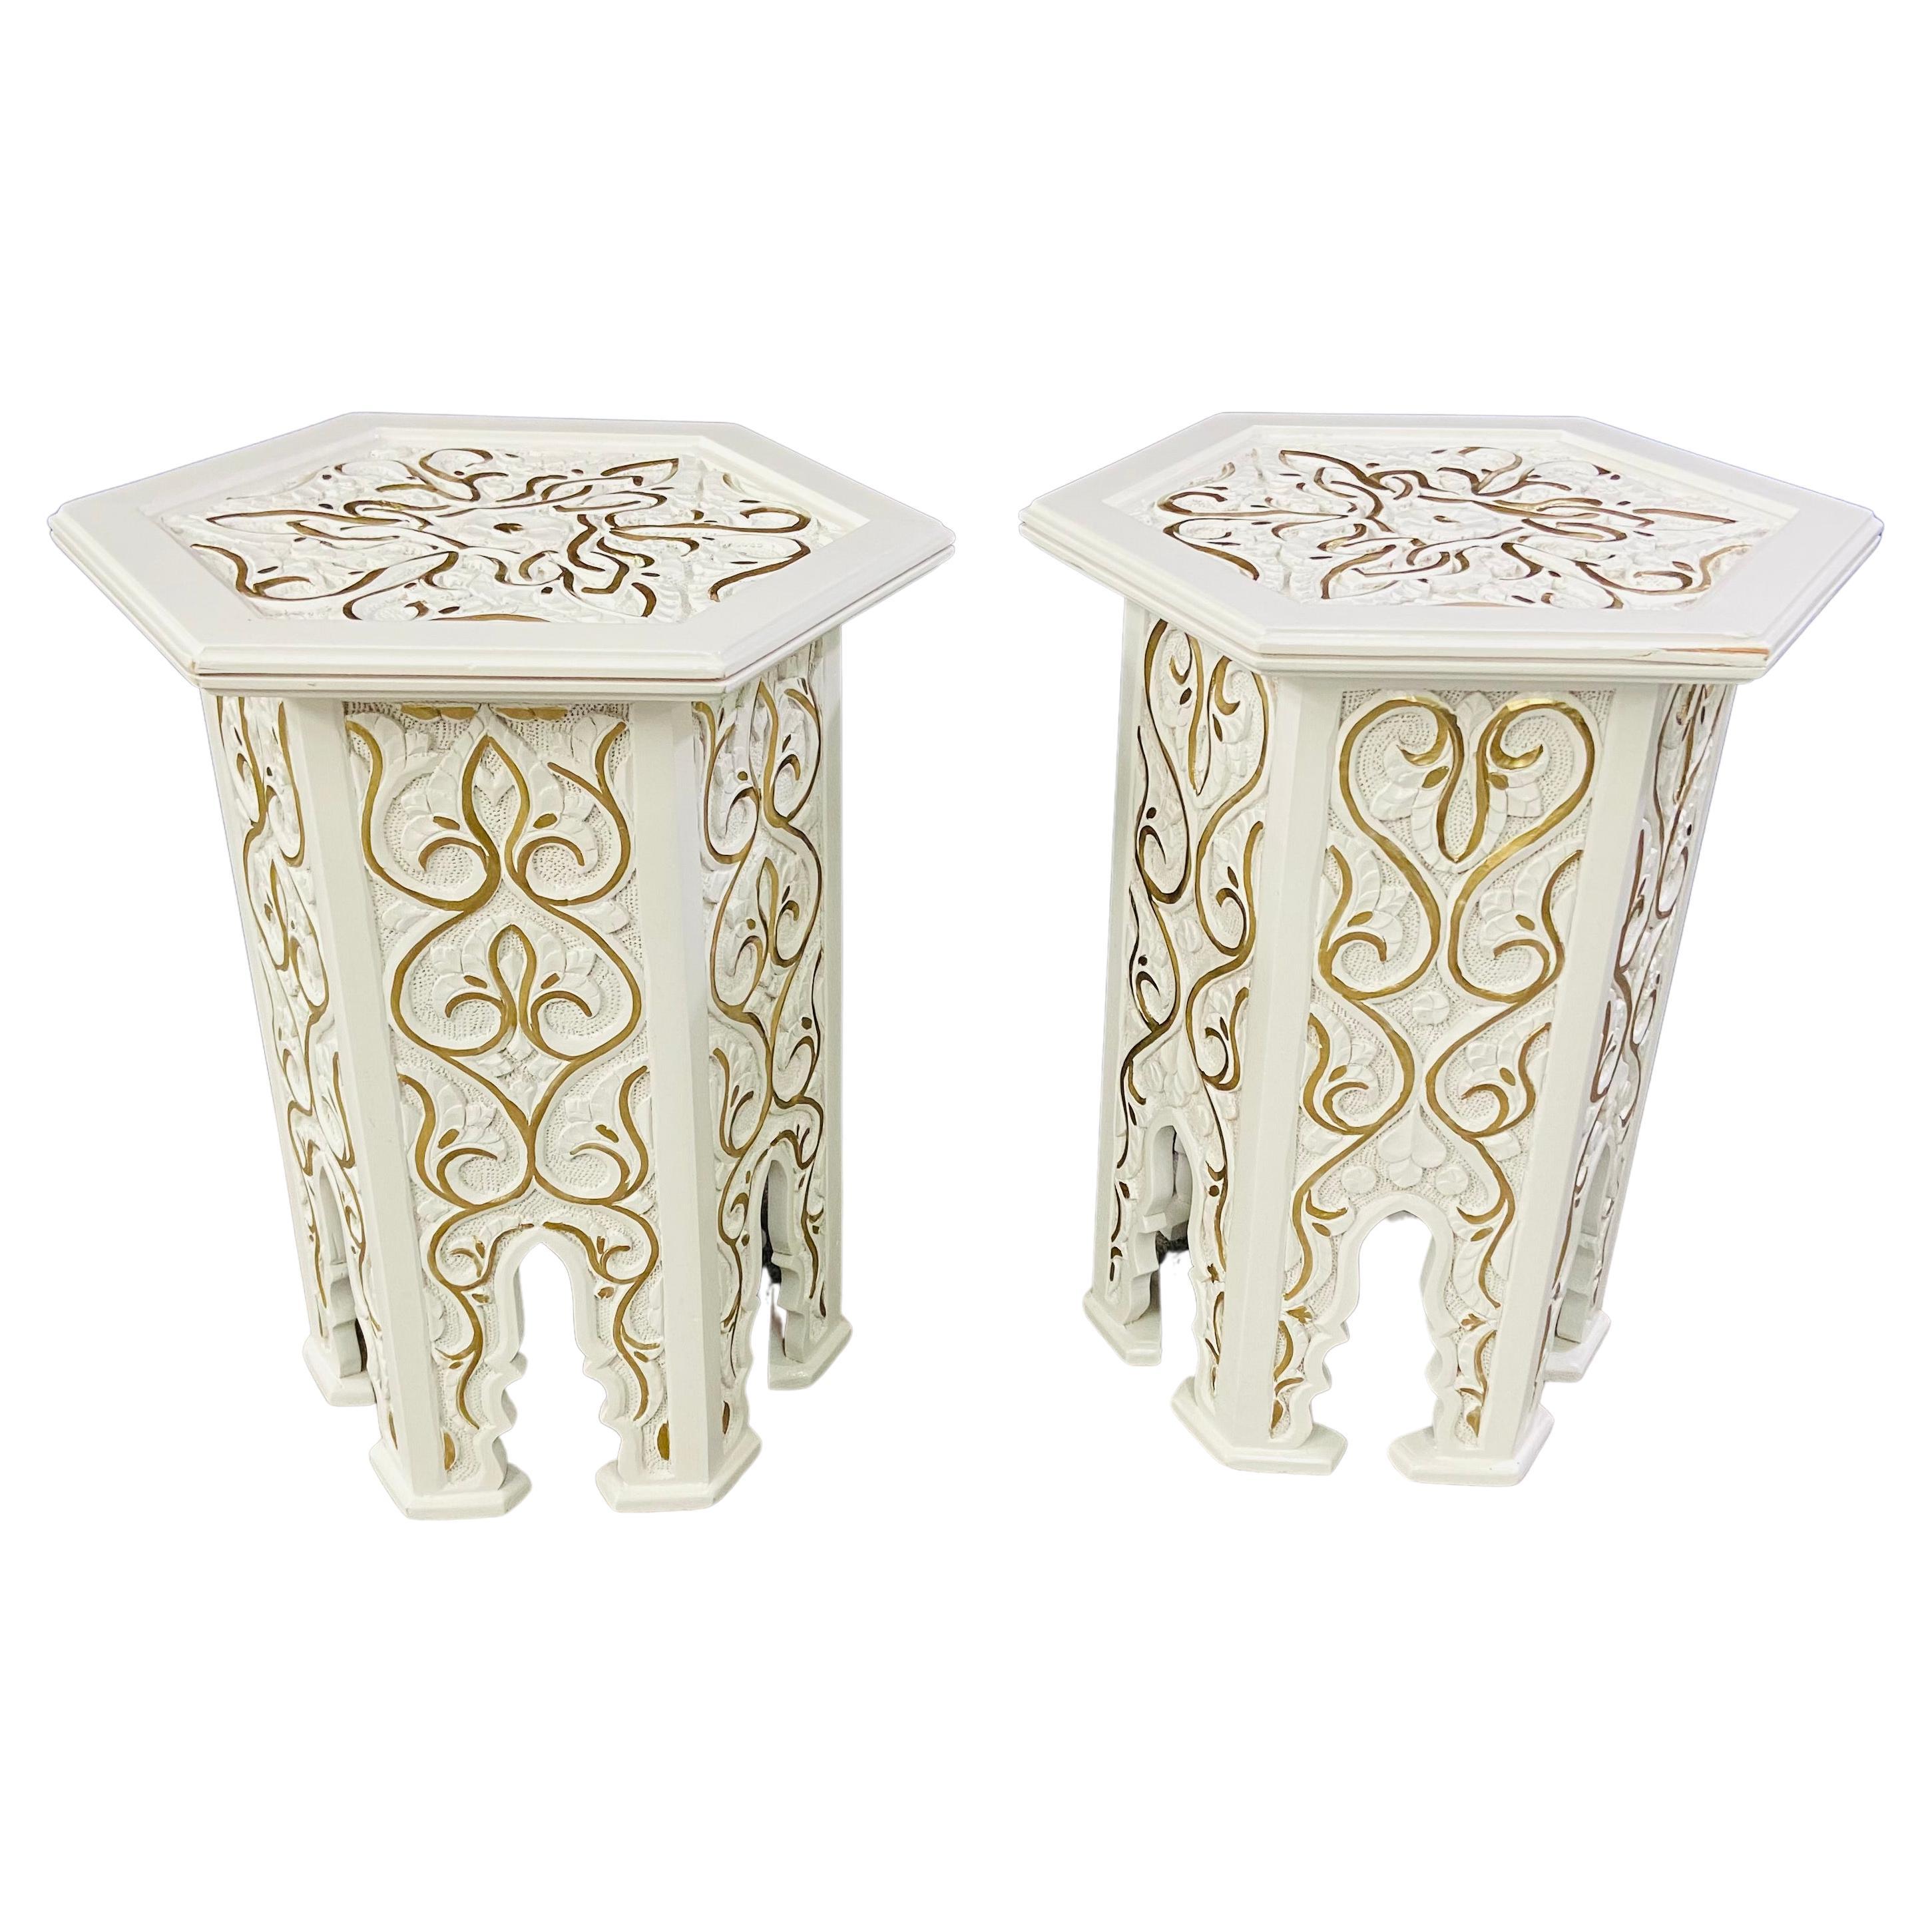 Hollywood Regency Moroccan Stye Side or End Table White with Gold Design, a Pair For Sale